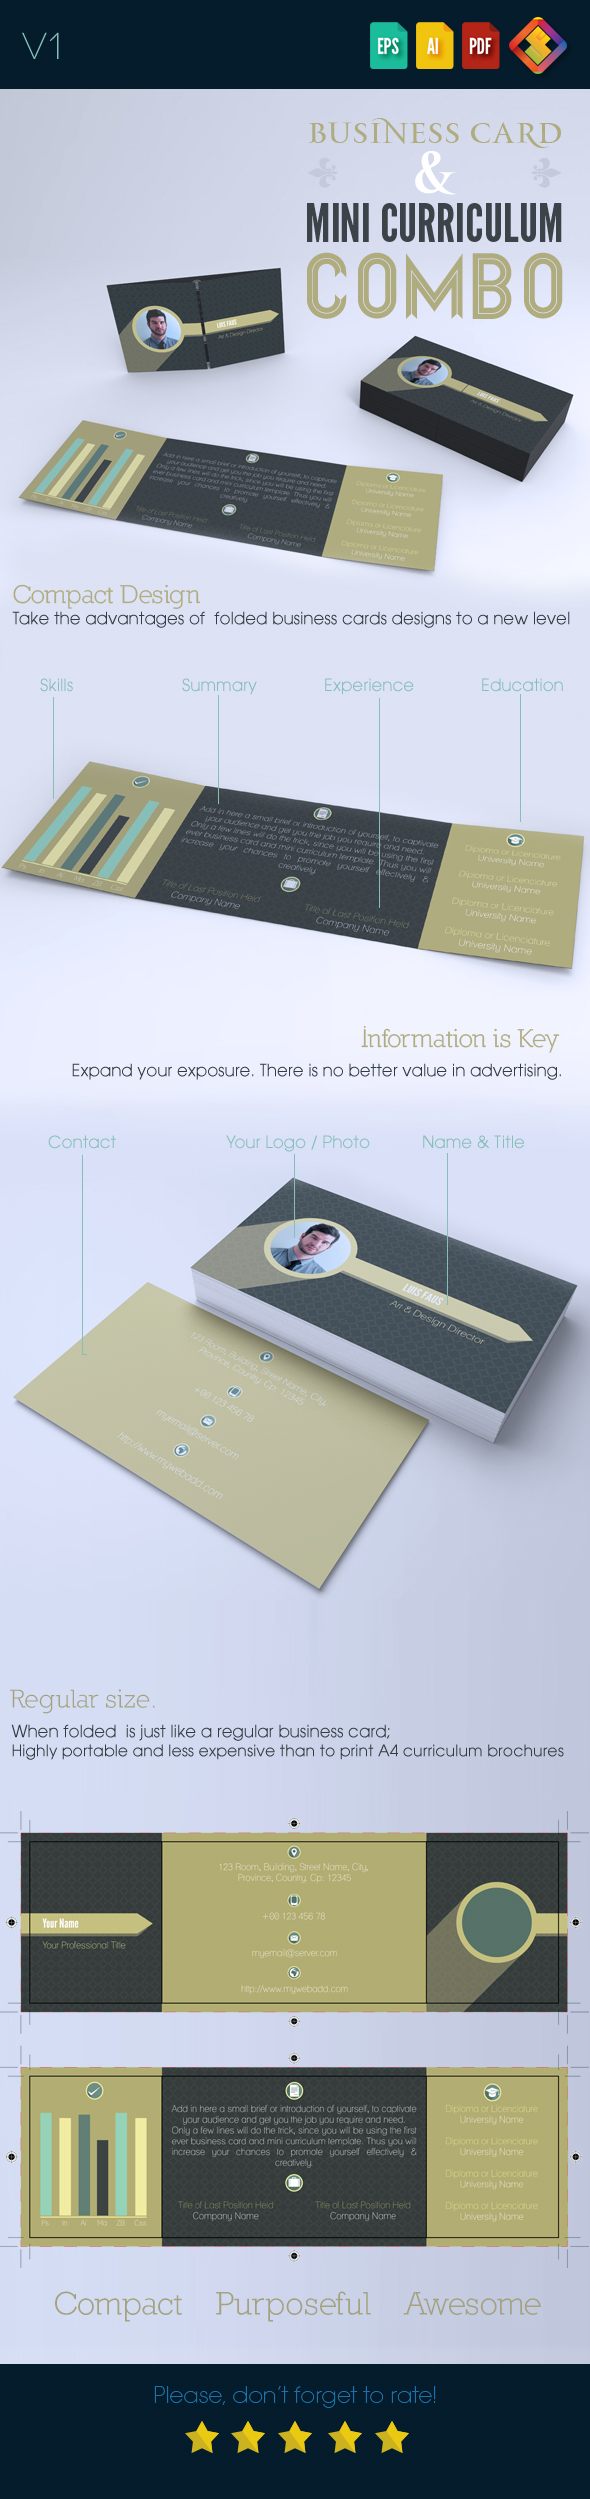 Foldable Business Card and Mini Curriculum Combo